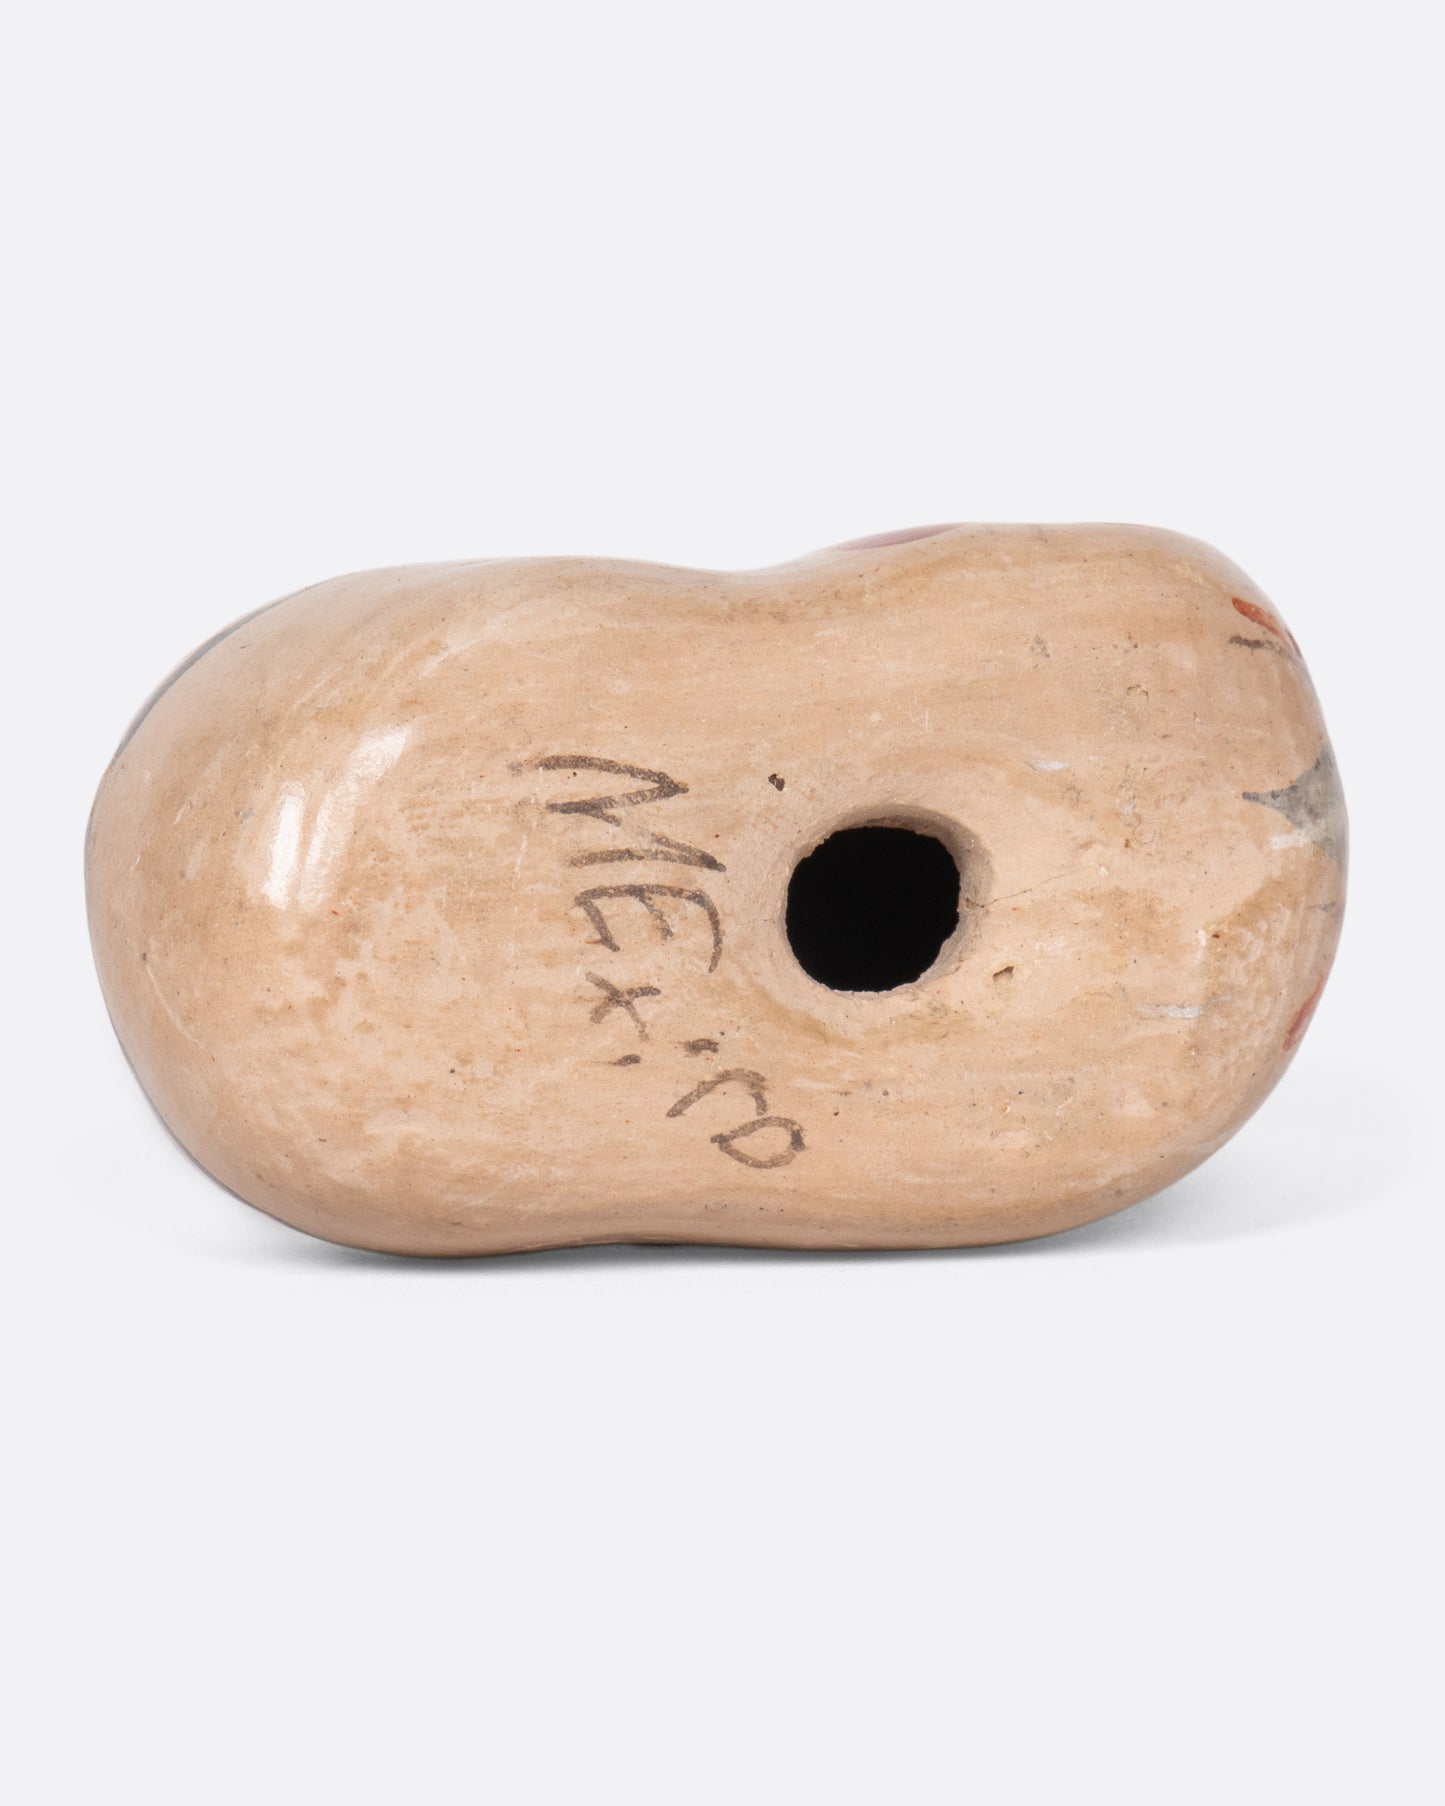 The word "Mexico" painted on the bottom of the cat figurine.